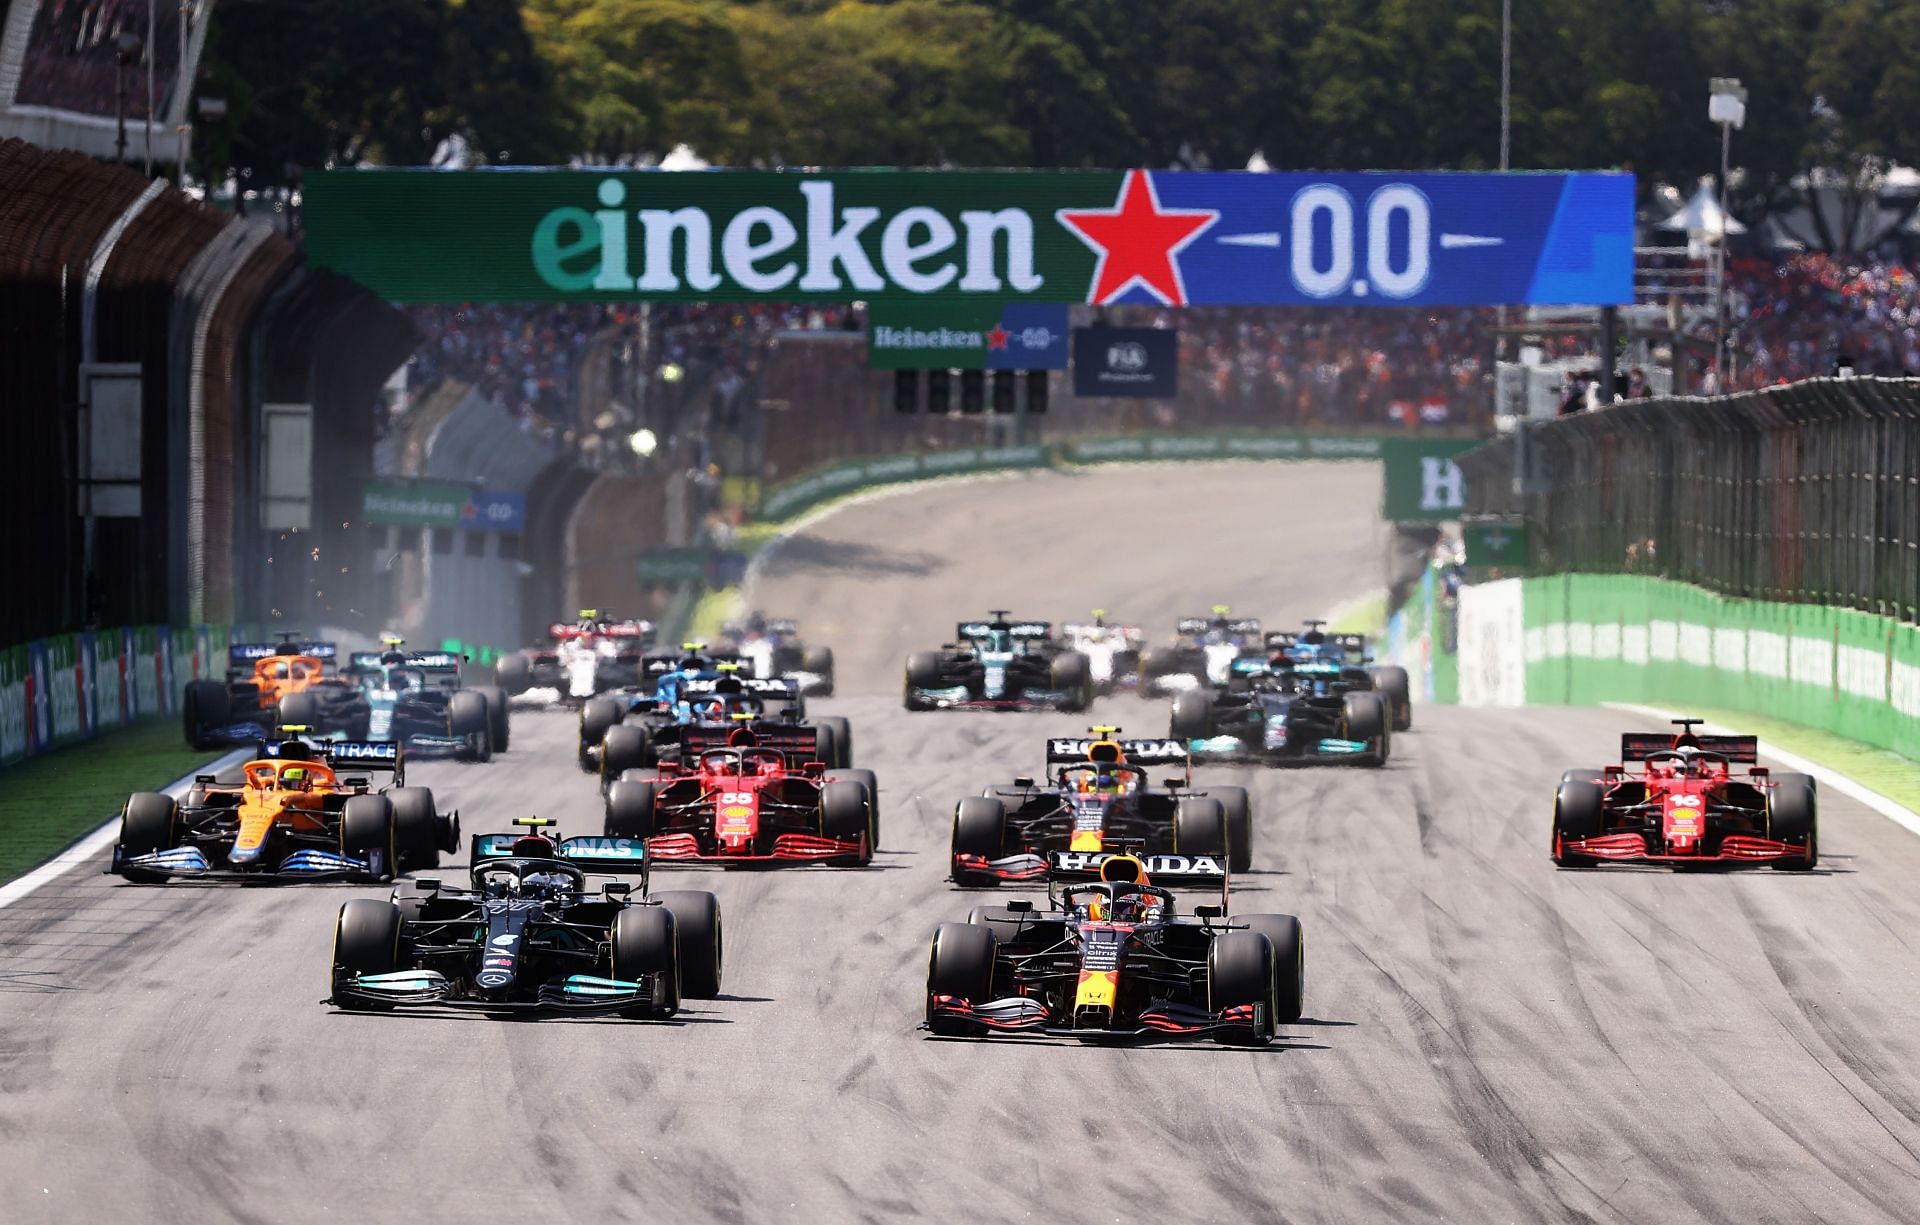 Max Verstappen leading the field at the start of the F1 Brazil Grand Prix race (Photo by Lars Baron/Getty Images).